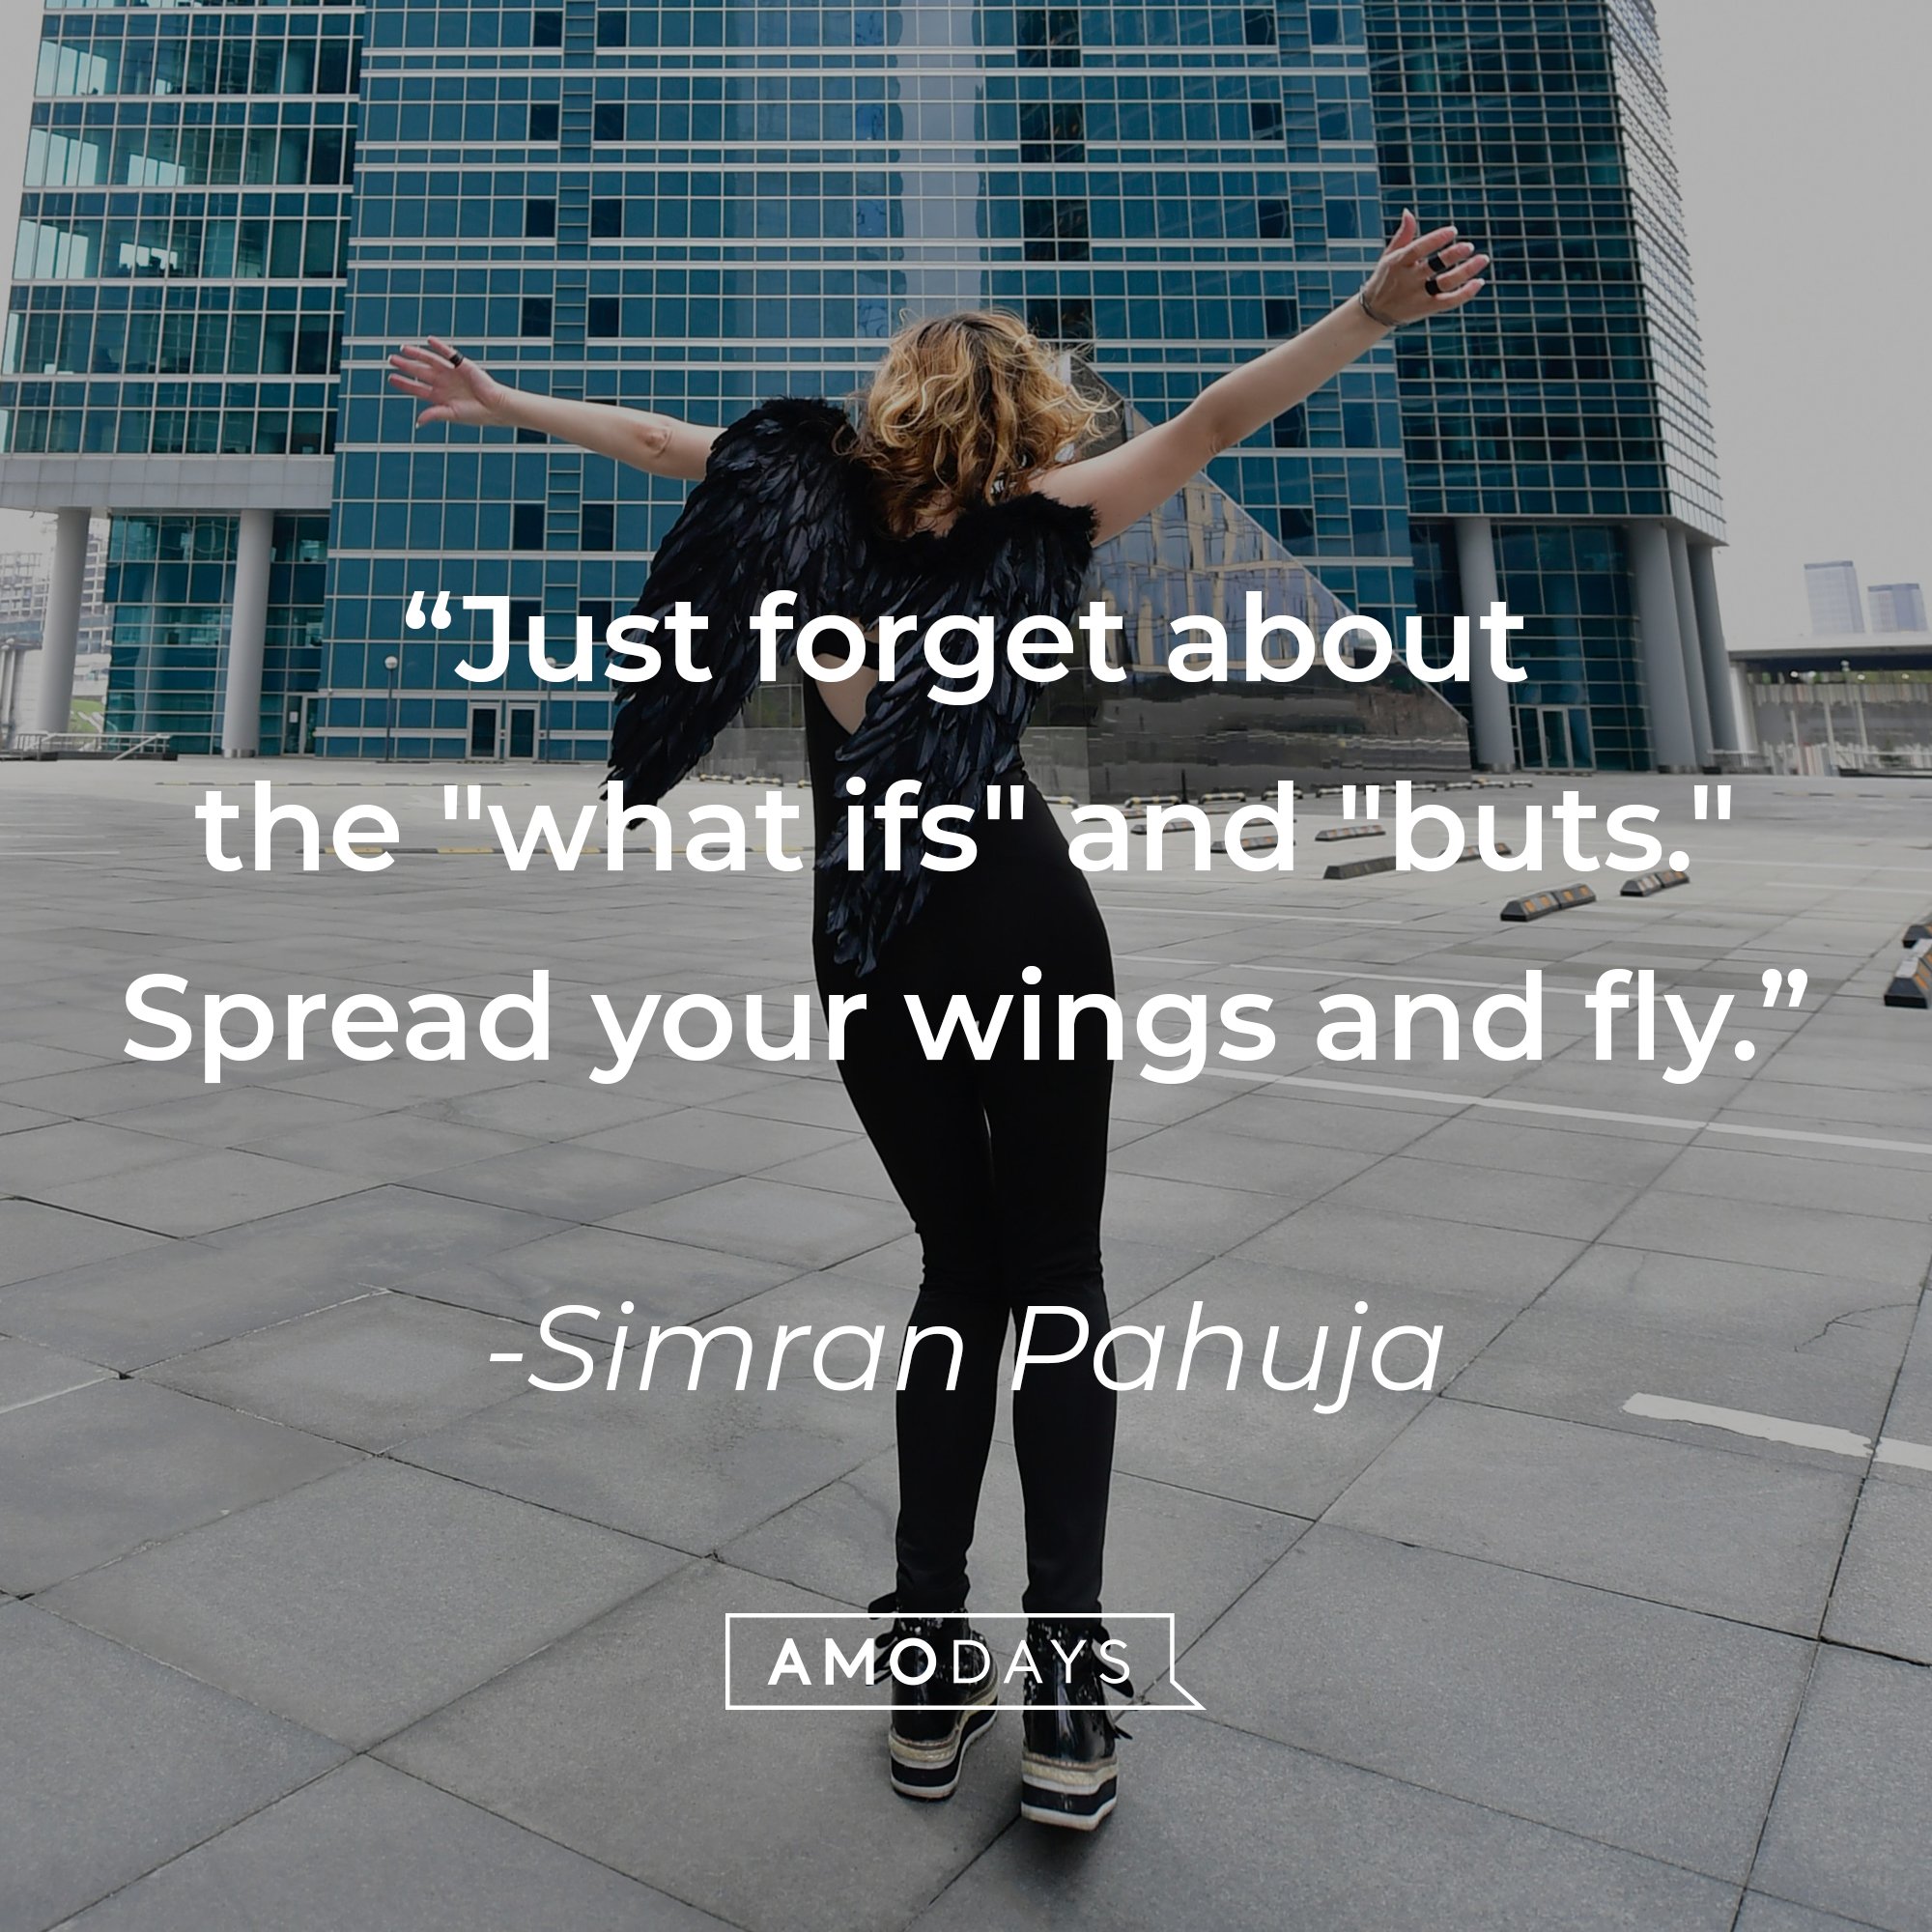 Simran Pahuja's quote: "Just forget about the "what ifs" and "buts." Spread your wings and fly." | Image: AmoDays